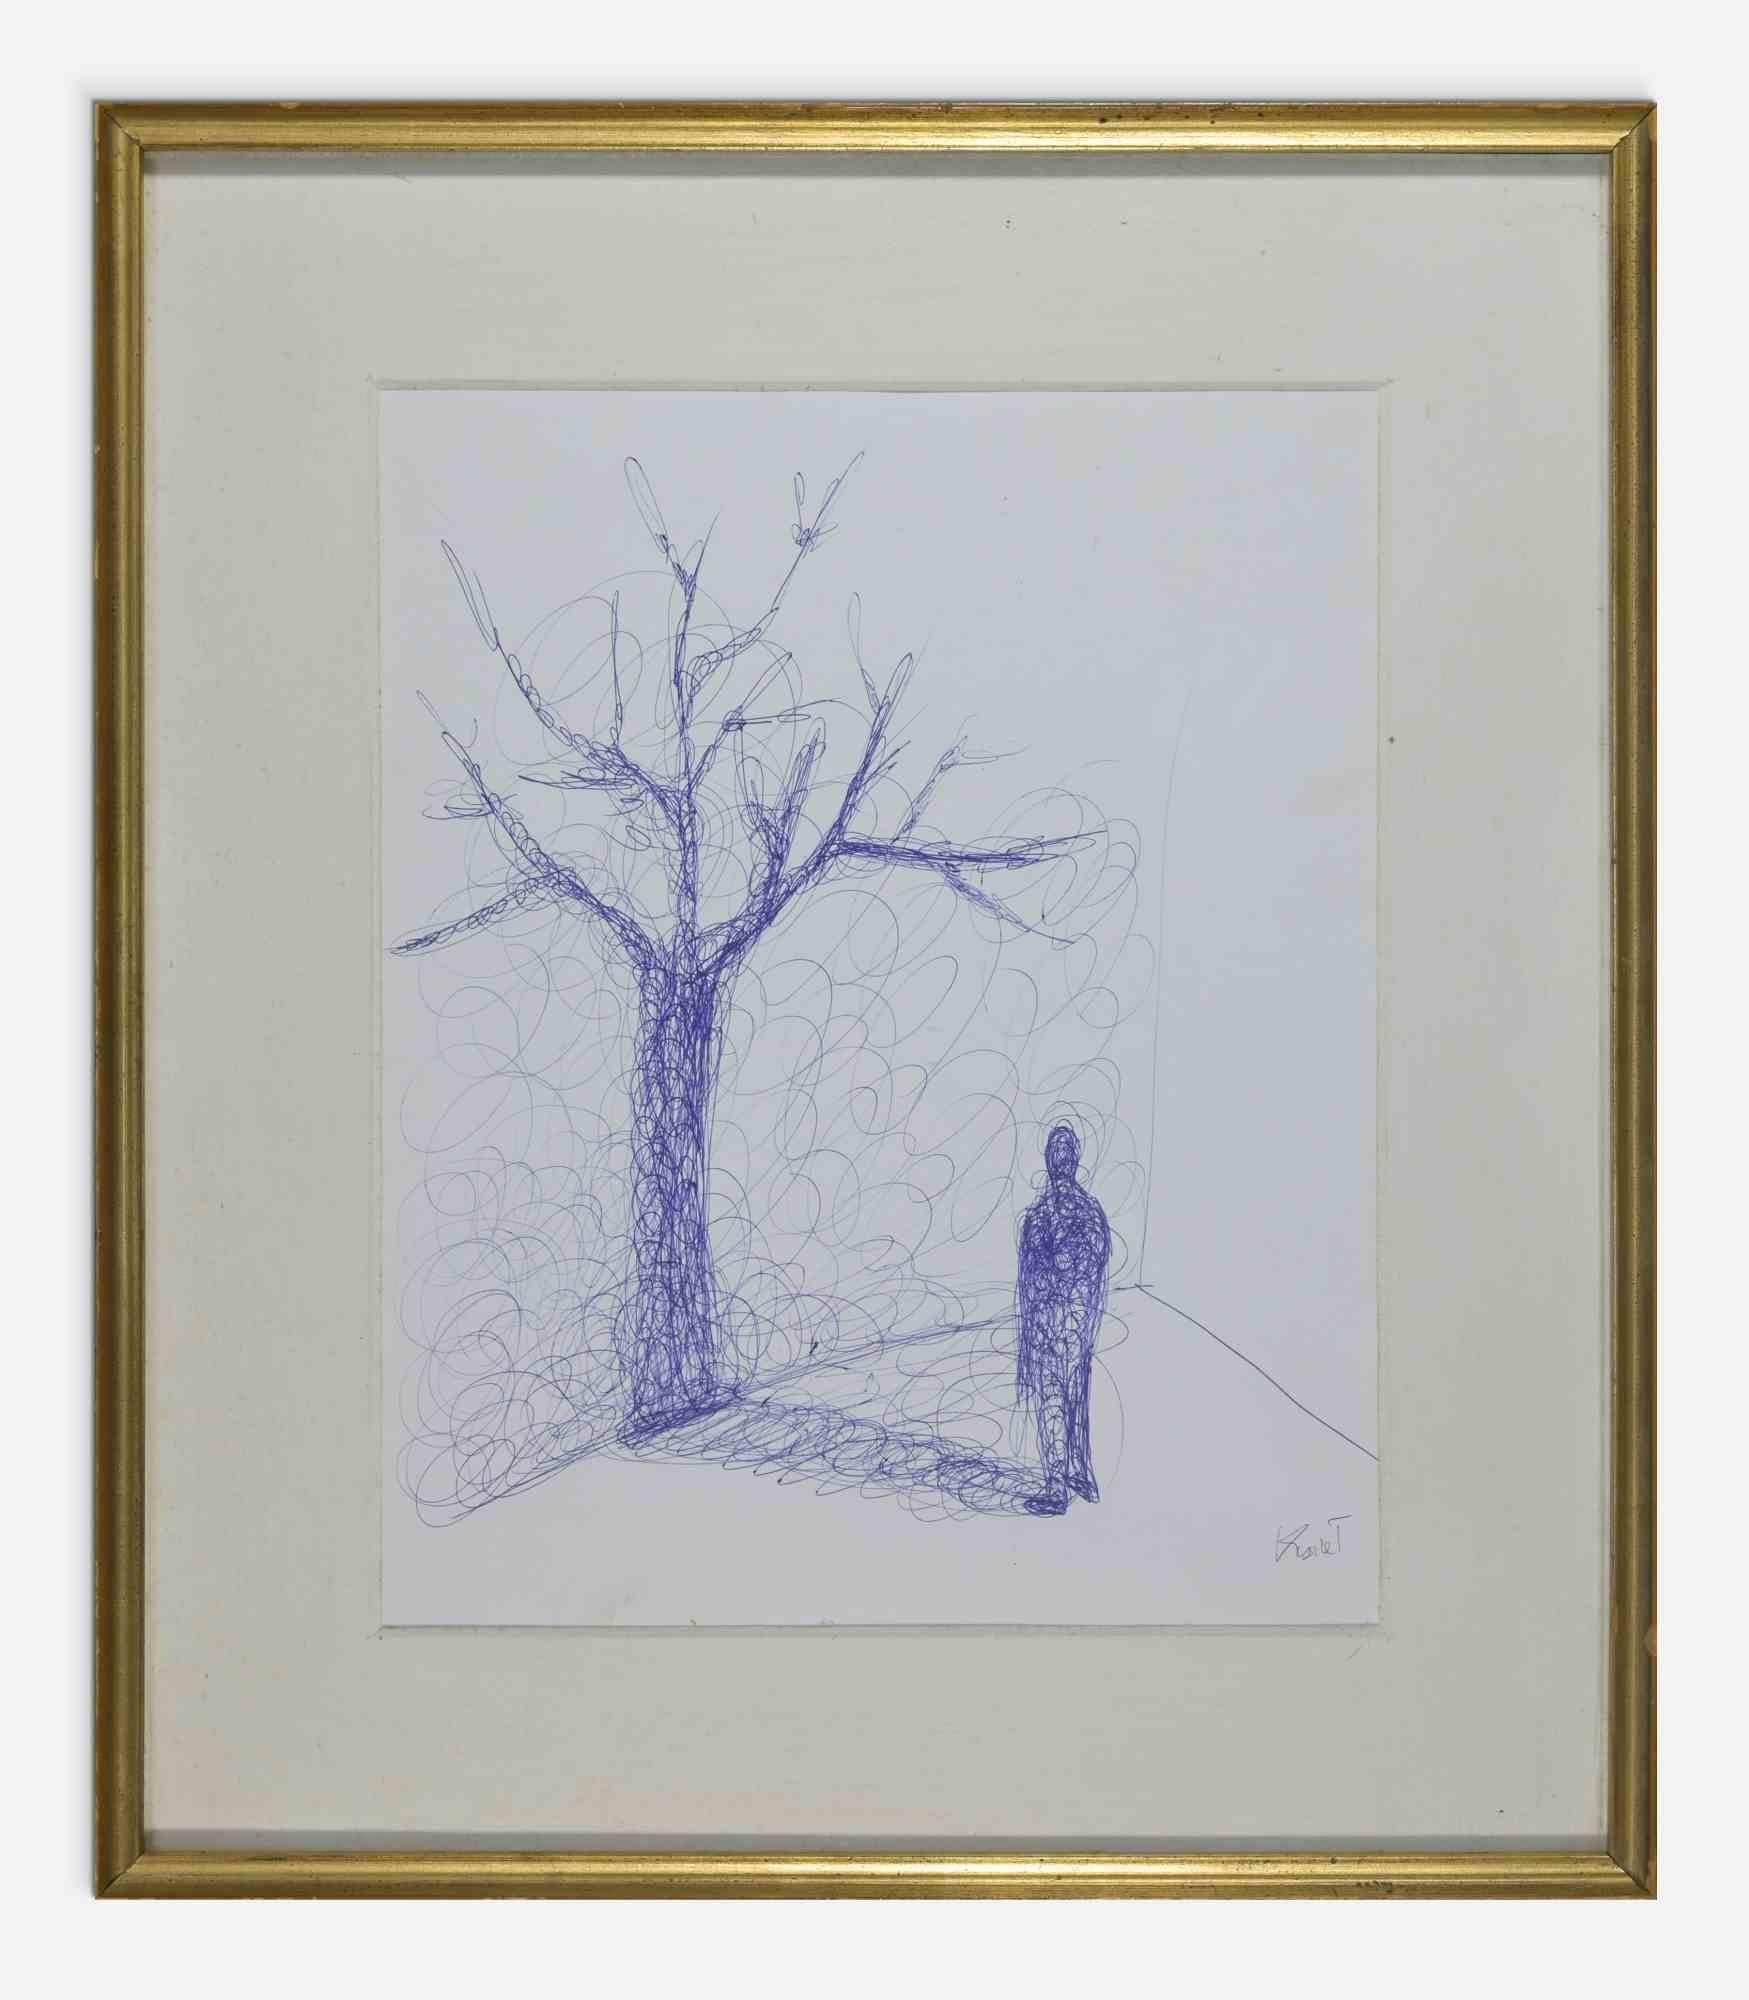  A man shadow  is an artwork realized by Keziat, in 2023.

Pen on paper.

49x43 cm with frame.

Handsigned in the lower right margin.

Born in San Severo (Apulia) in 1973, Italian artist Kezia Terracciano, alias Keziat, currently lives in Rome. She